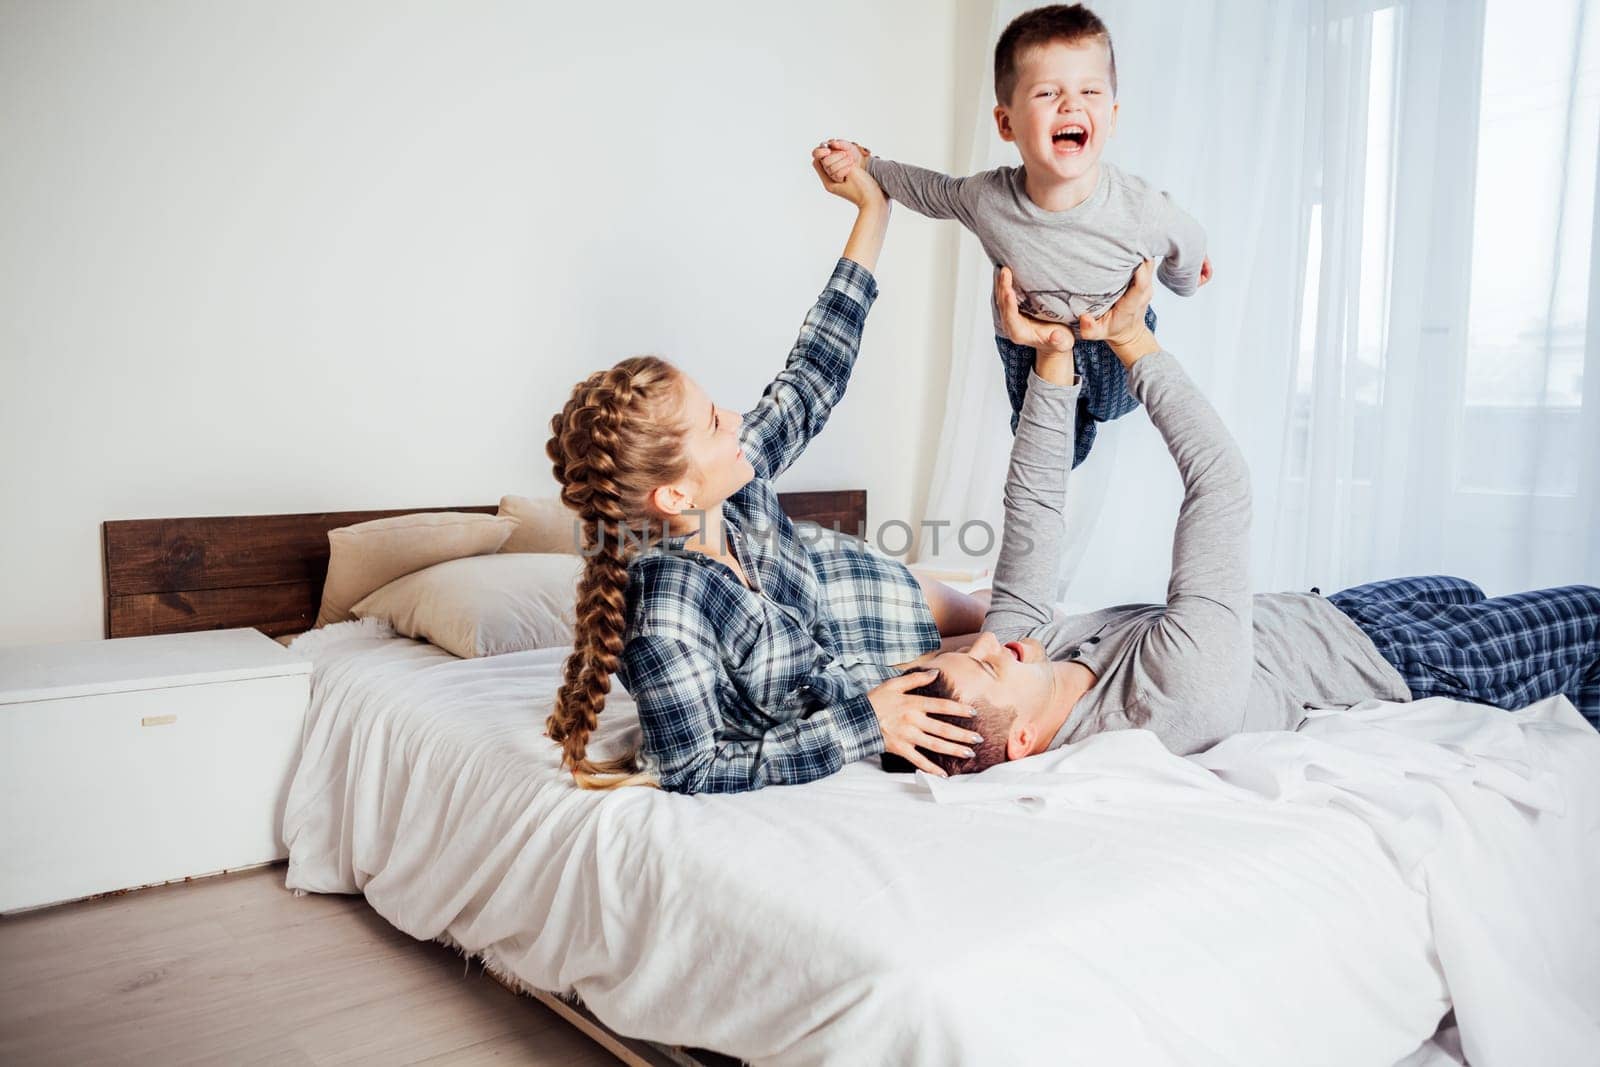 mom dad and son lie on the bed at home woke up